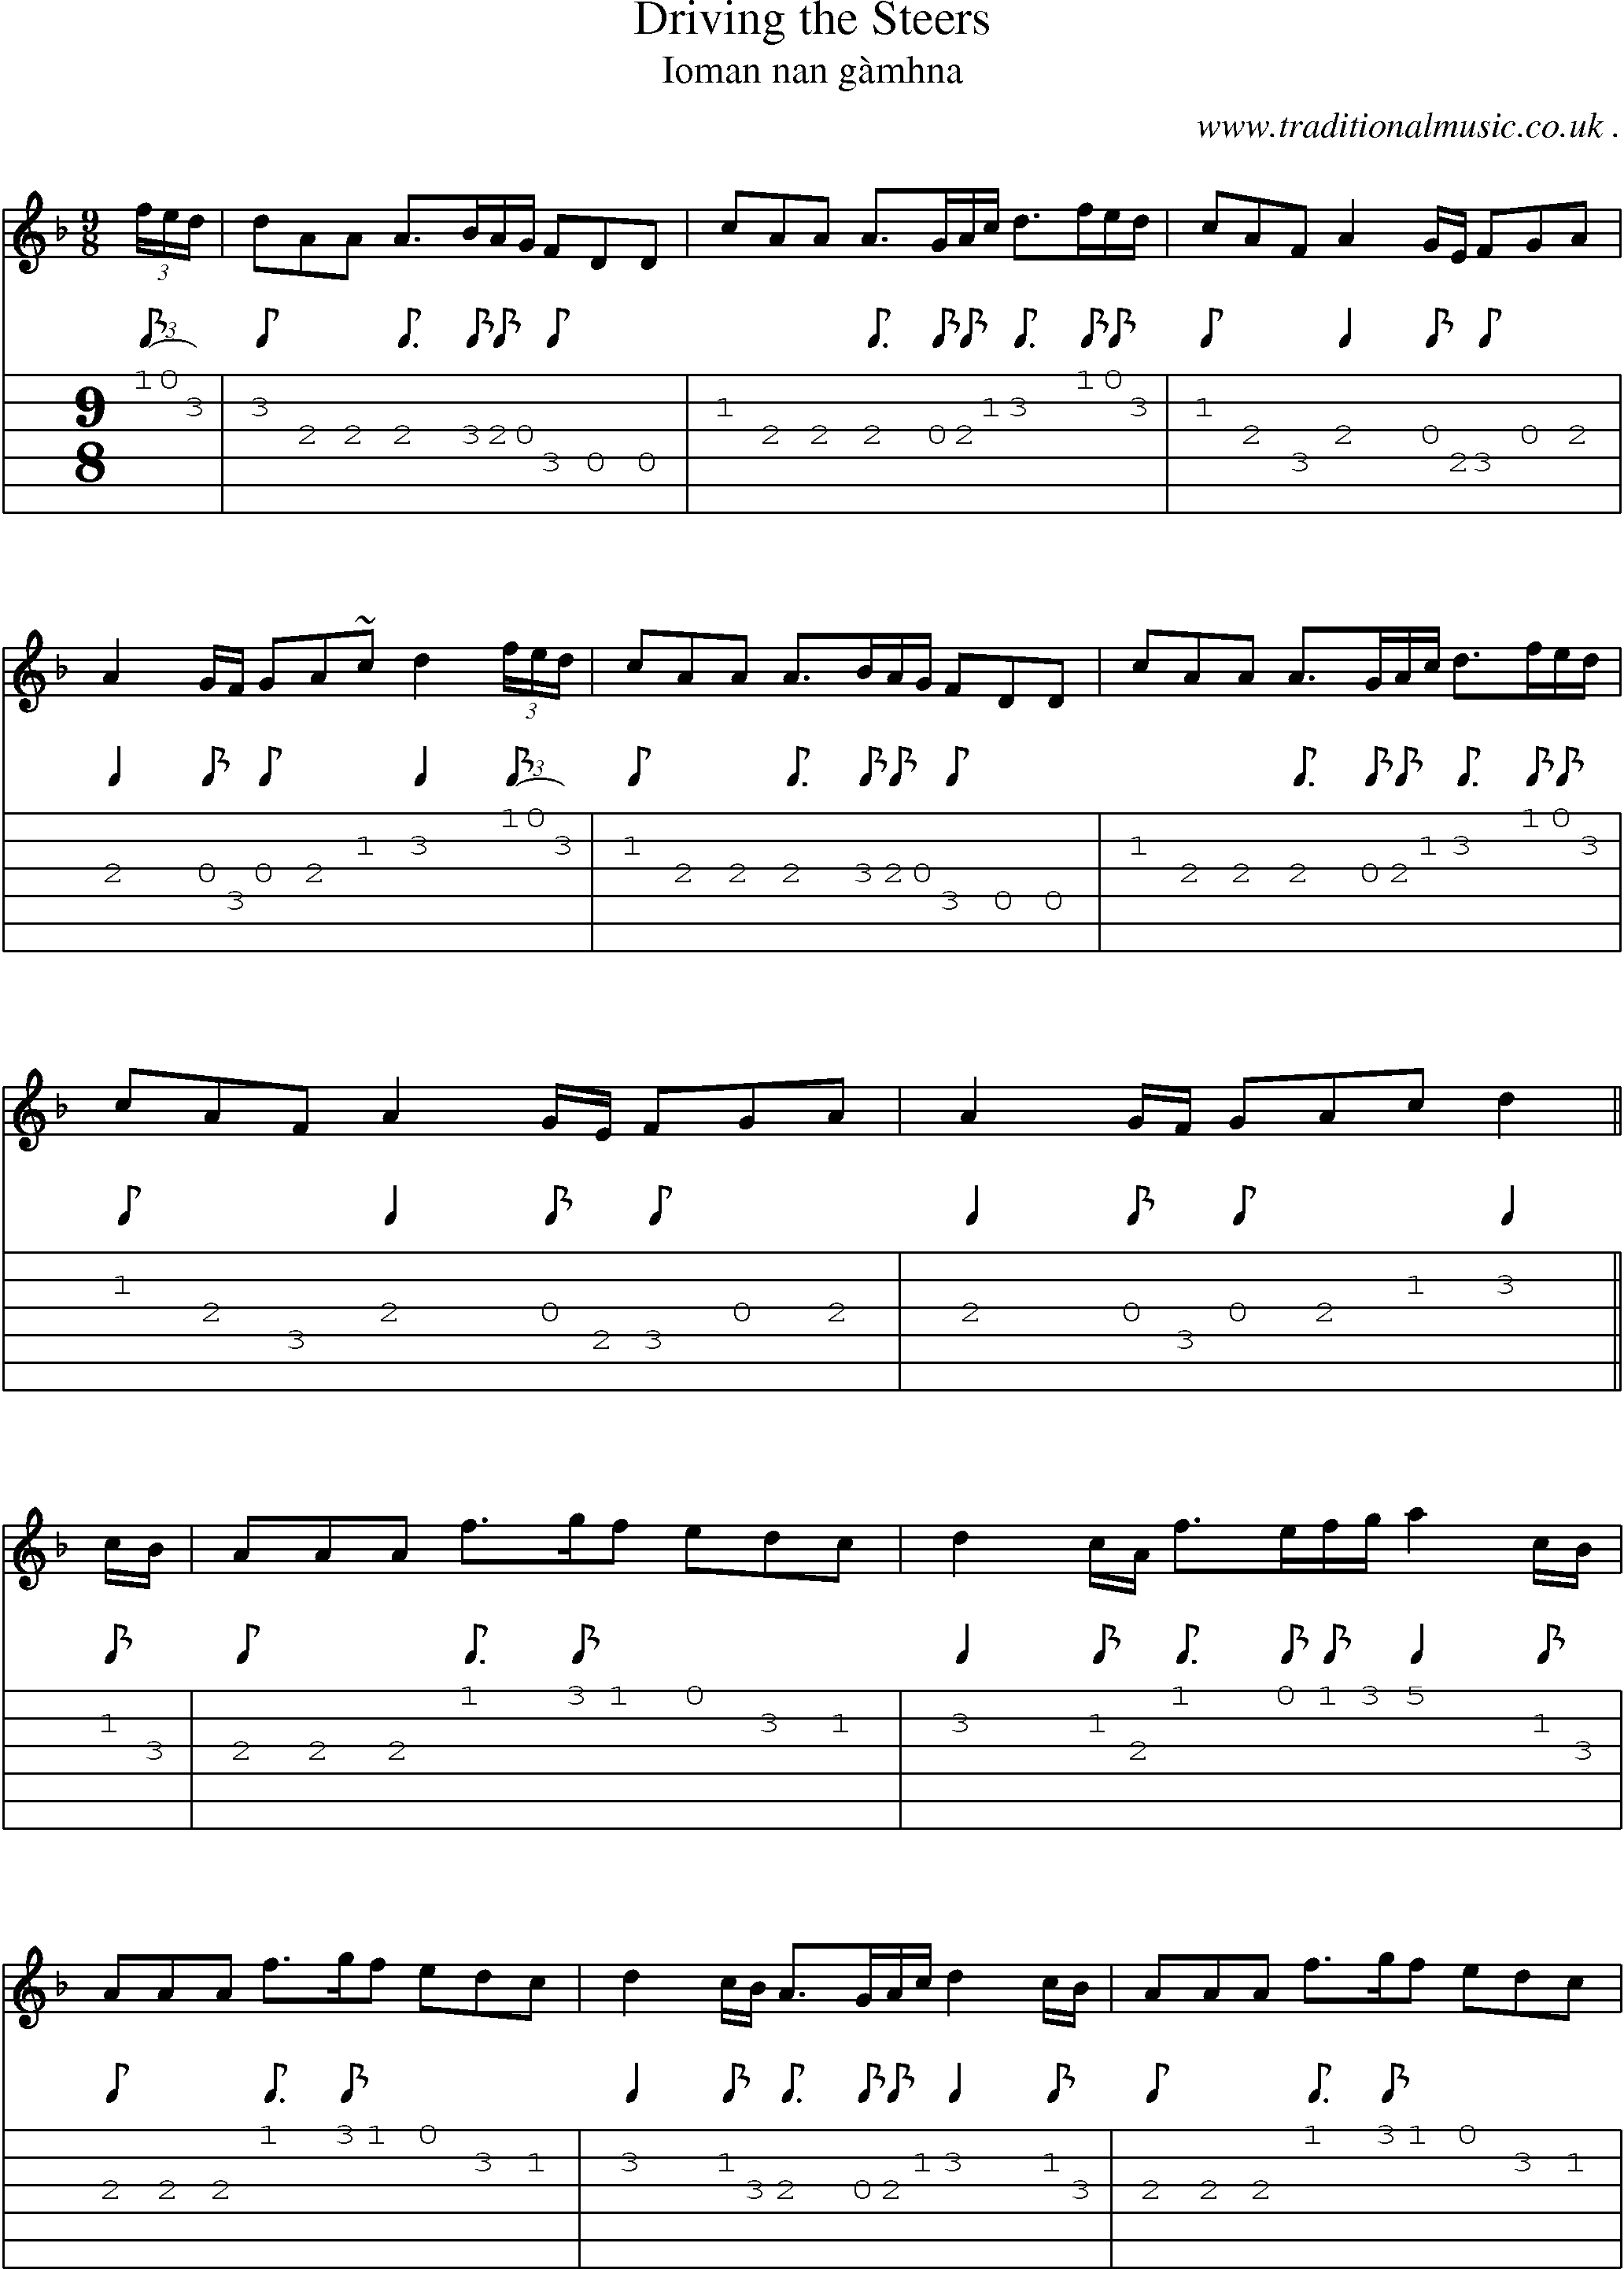 Sheet-music  score, Chords and Guitar Tabs for Driving The Steers